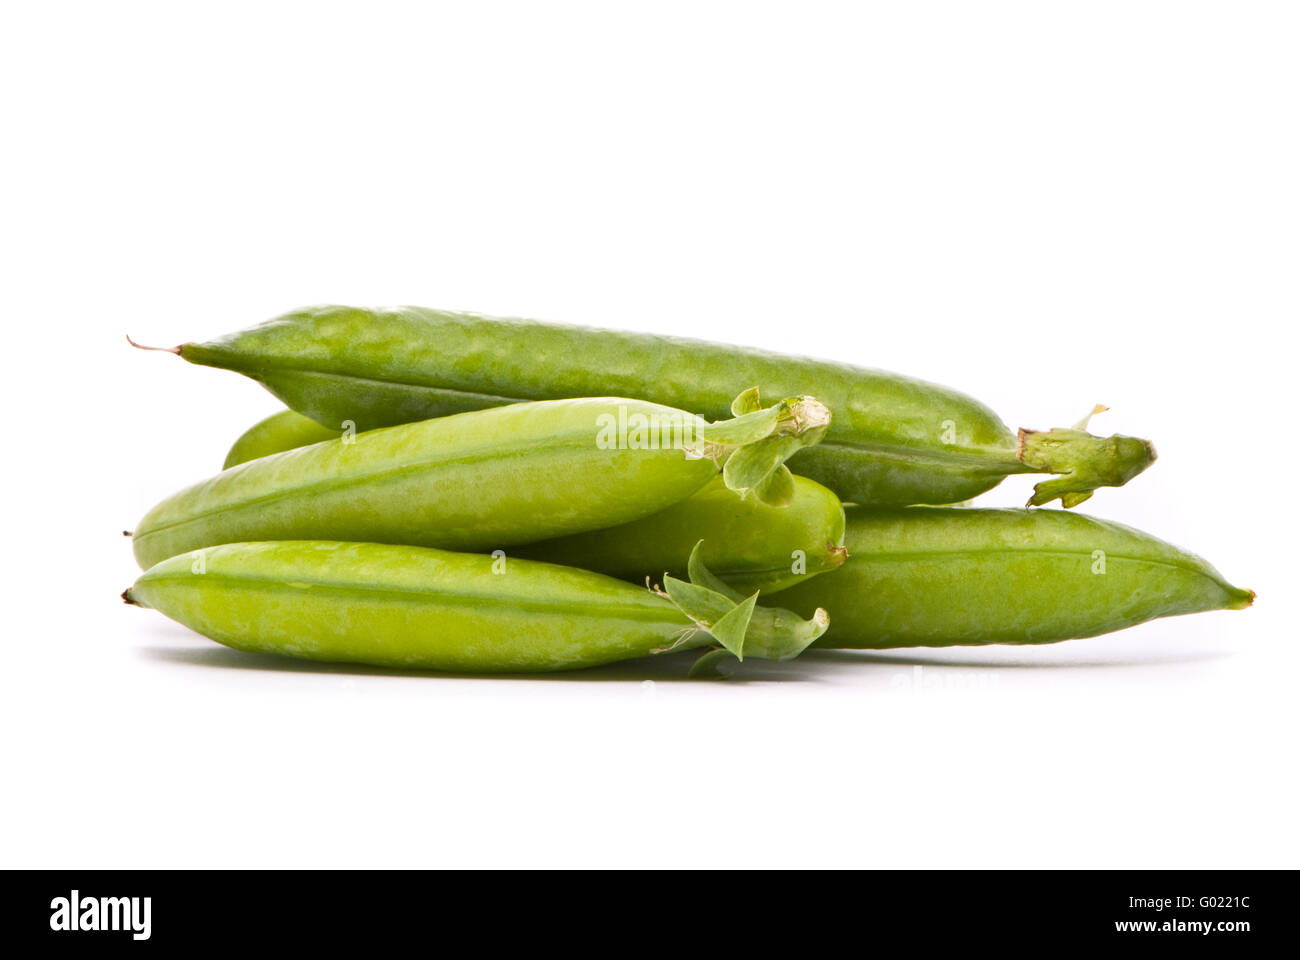 Pods of fresh green peas on a white background Stock Photo